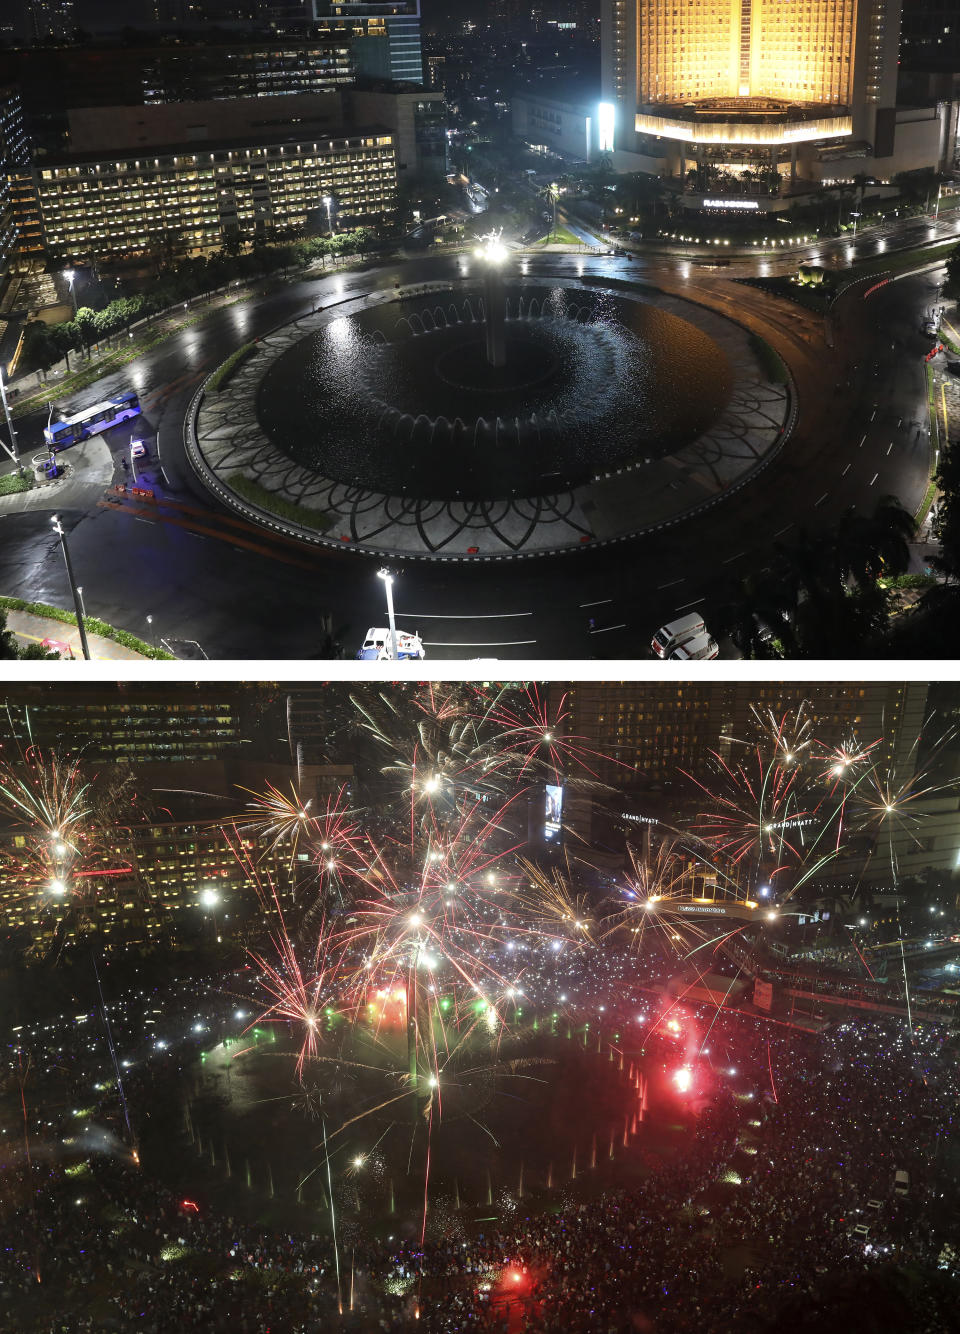 This combo image shows Hotel Indonesia Roundabout in Jakarta, a popular spot for New Year's Eve celebration, taken on Thursday, Dec. 31, 2020, top photo, and Saturday, Dec. 31, 2016, bottom photo. As the world says goodbye to 2020, there will be countdowns and live performances, but no massed jubilant crowds in traditional gathering spots like the Champs Elysees in Paris and New York City's Times Square this New Year's Eve. The virus that ruined 2020 has led to cancelations of most fireworks displays and public events in favor of made-for-TV-only moments in party spots like London and Rio de Janeiro. (AP Photo/Dita Alangkara, Tatan Syuflana)